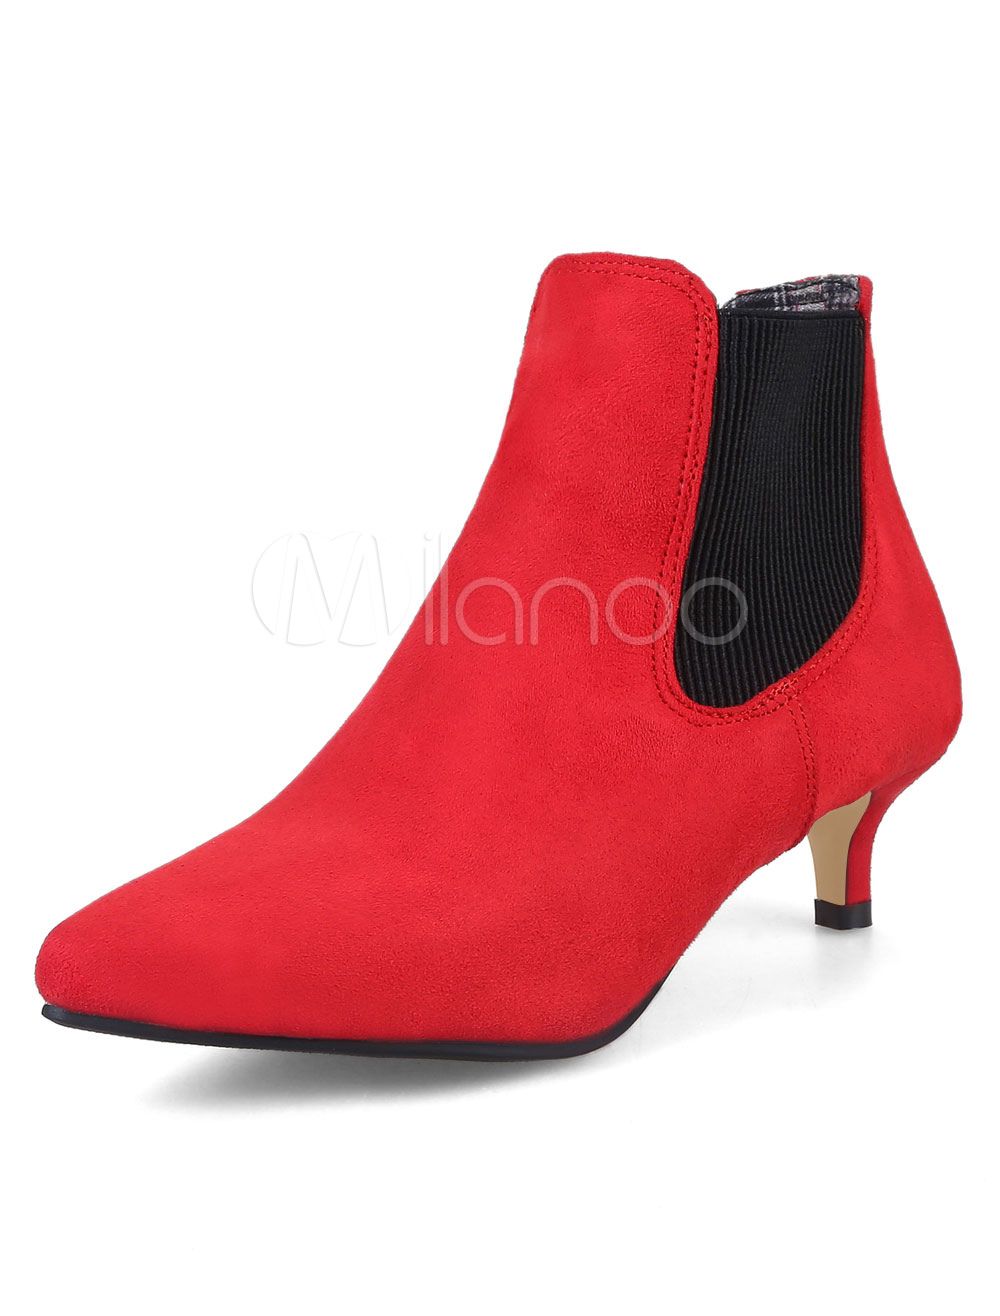 Red Ankle Boots Suede Leather Pointed Toe Kitten Heel Booties For Women | Milanoo